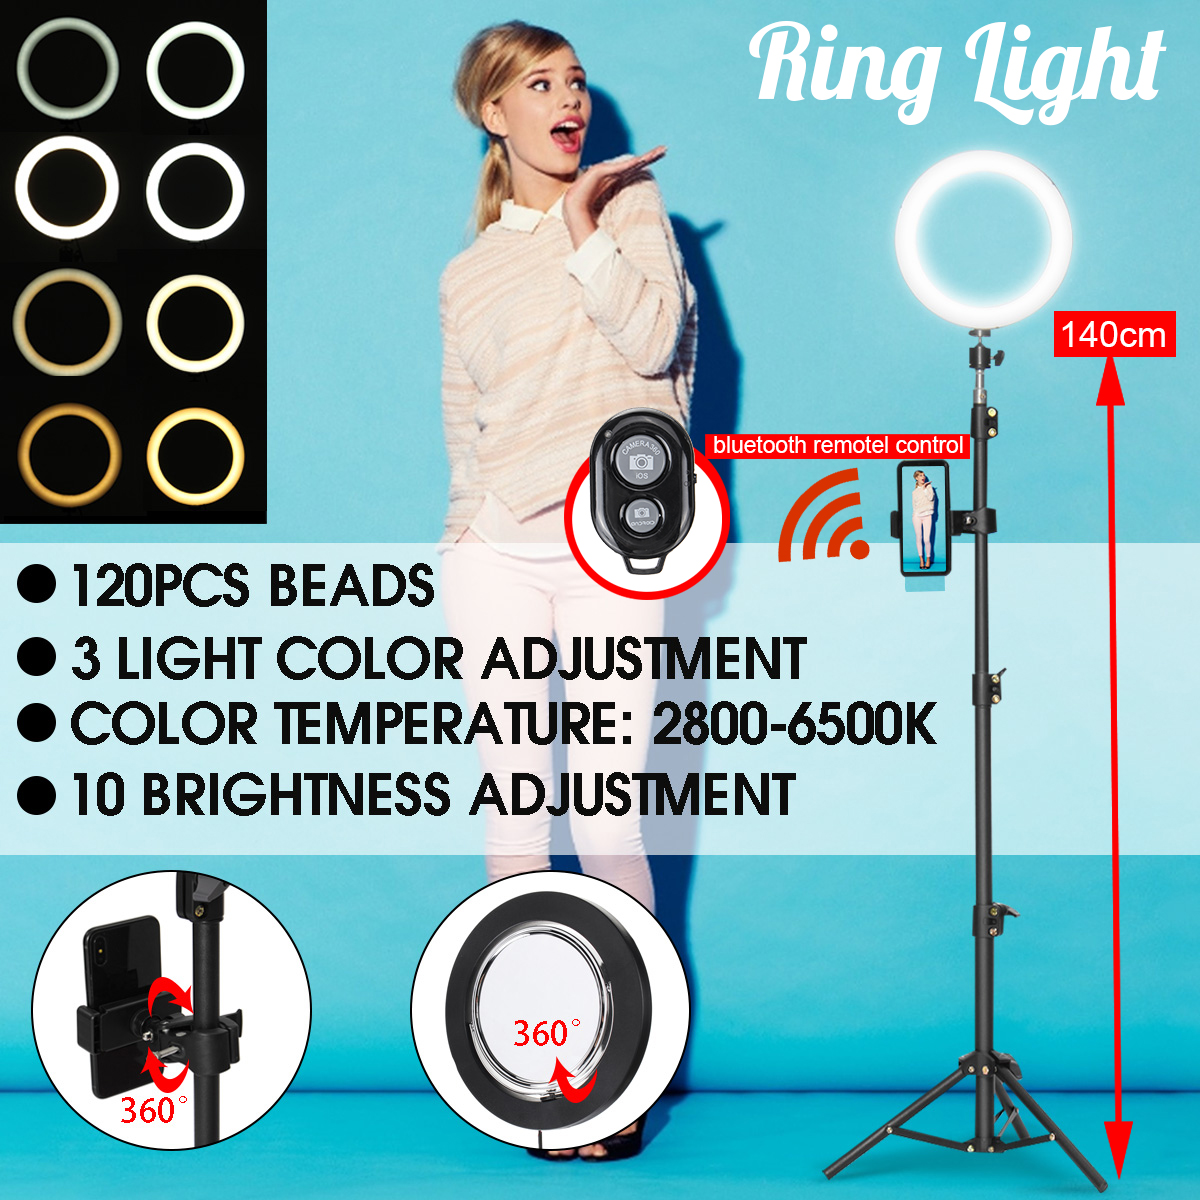 866quot-Live-Stream-Makeup-Mirror-Selfie-LED-Ring-Light-Fill-in-Light-With-Remote-Control-Cell-Phone-1635844-1